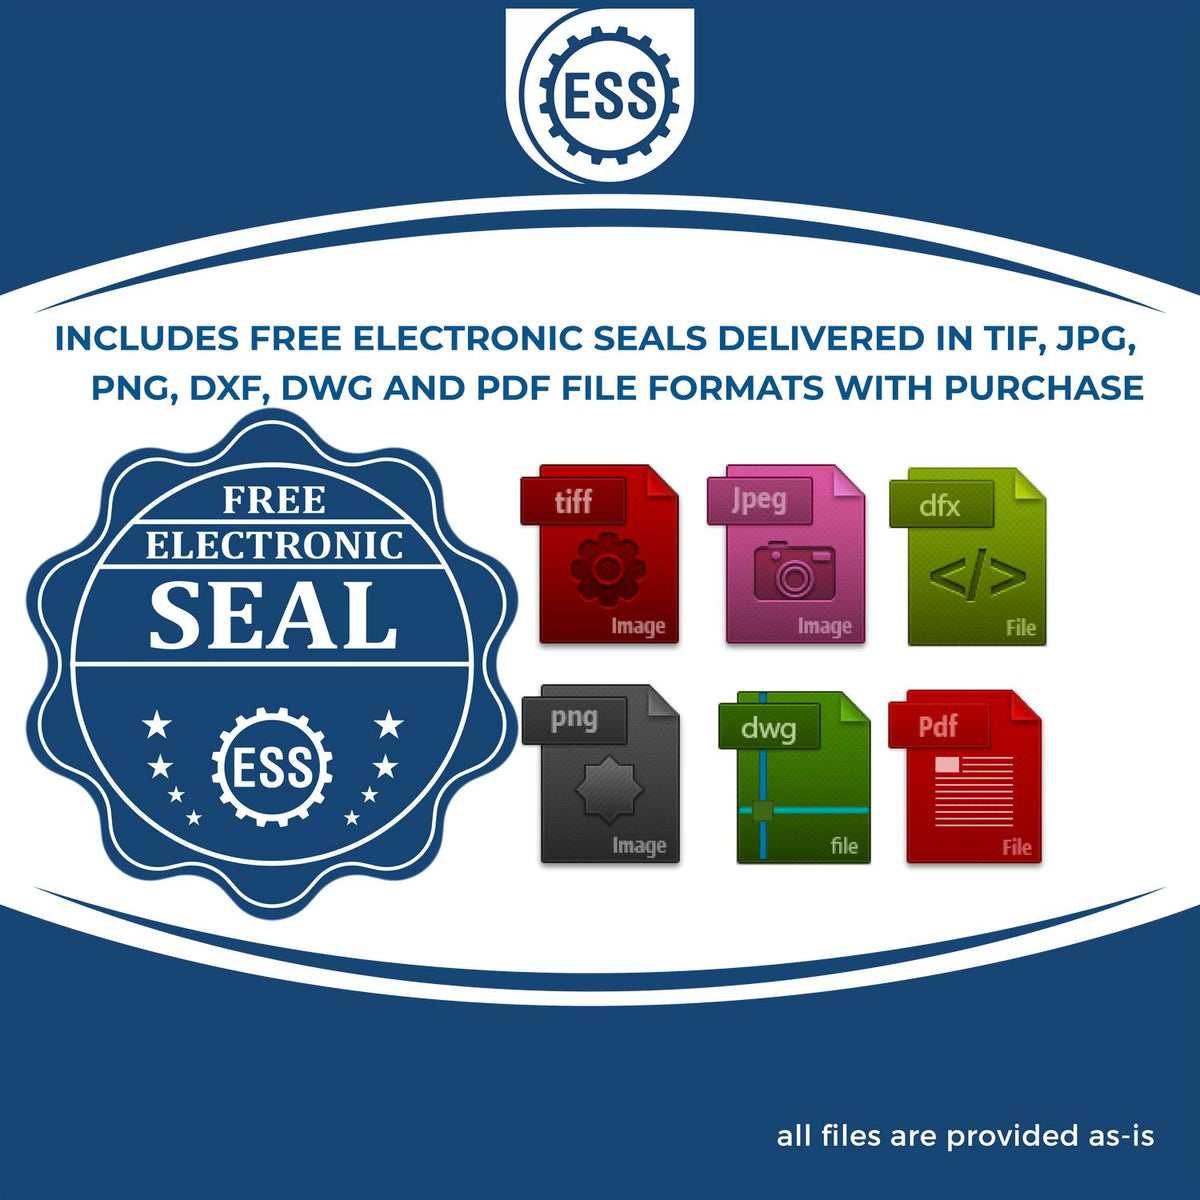 An infographic for the free electronic seal for the Long Reach Florida Geology Seal illustrating the different file type icons such as DXF, DWG, TIF, JPG and PNG.